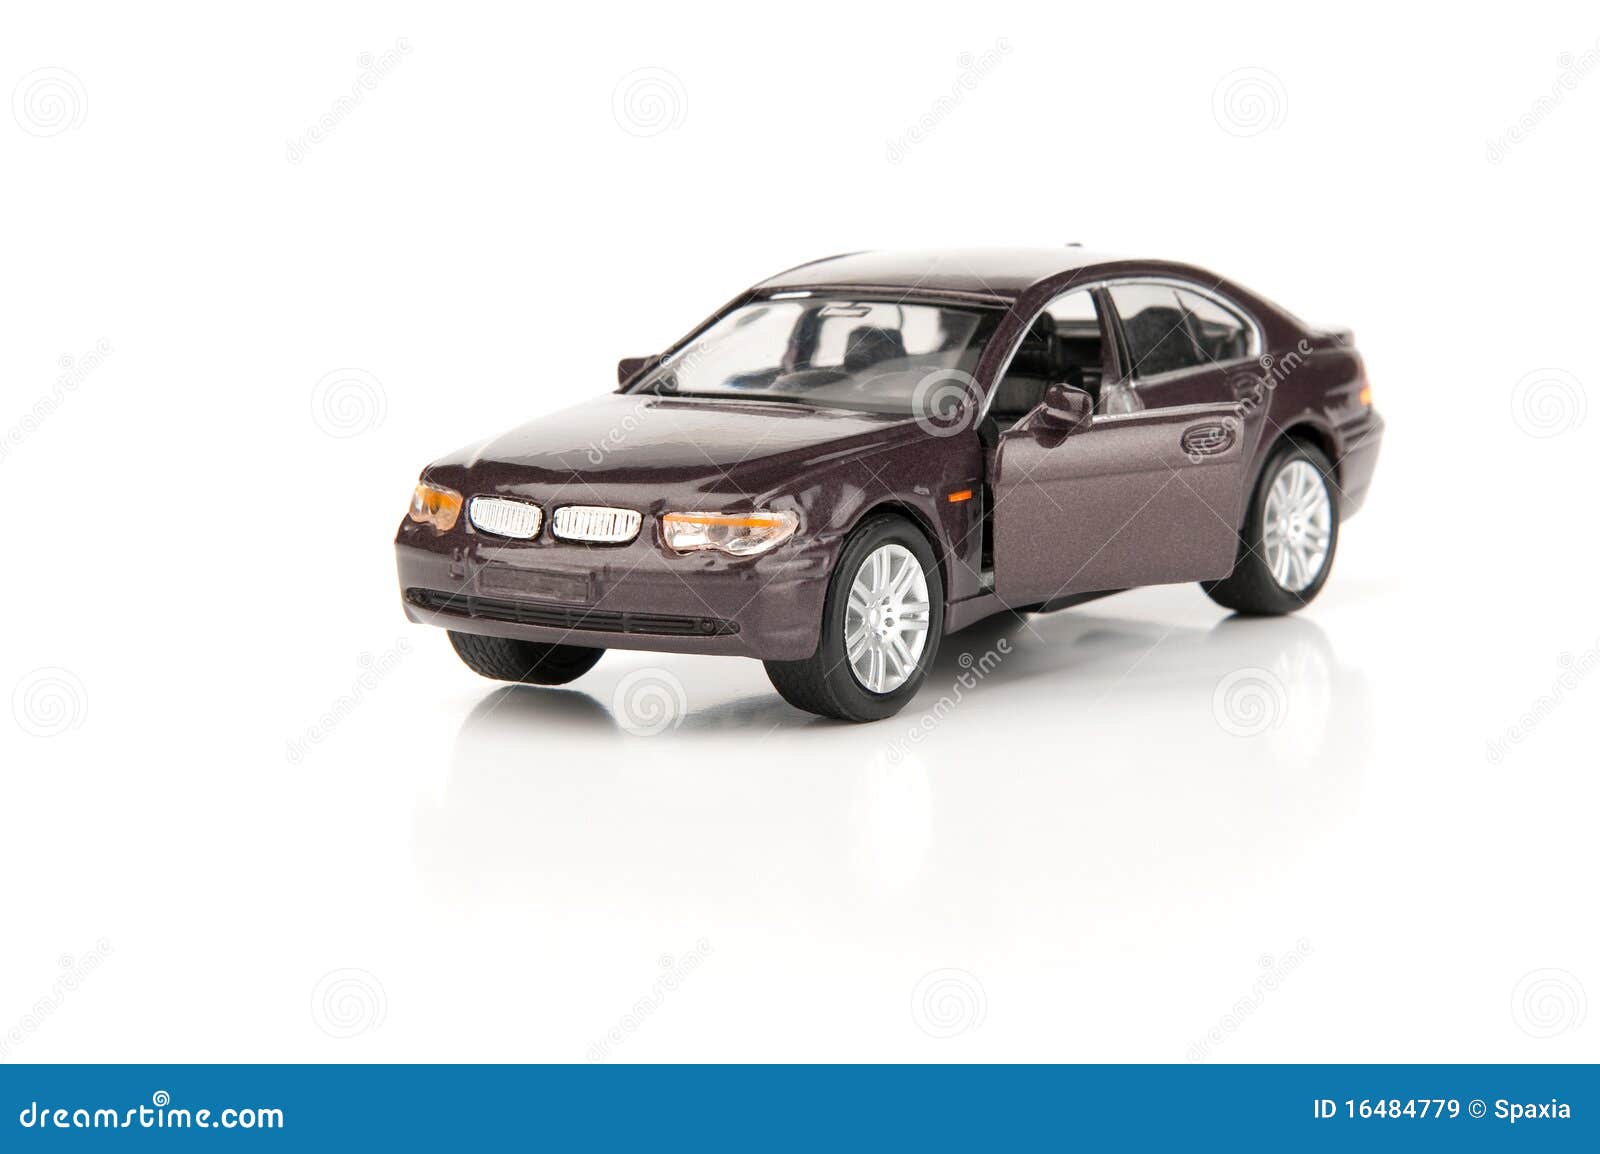 Toy car isolated on a white